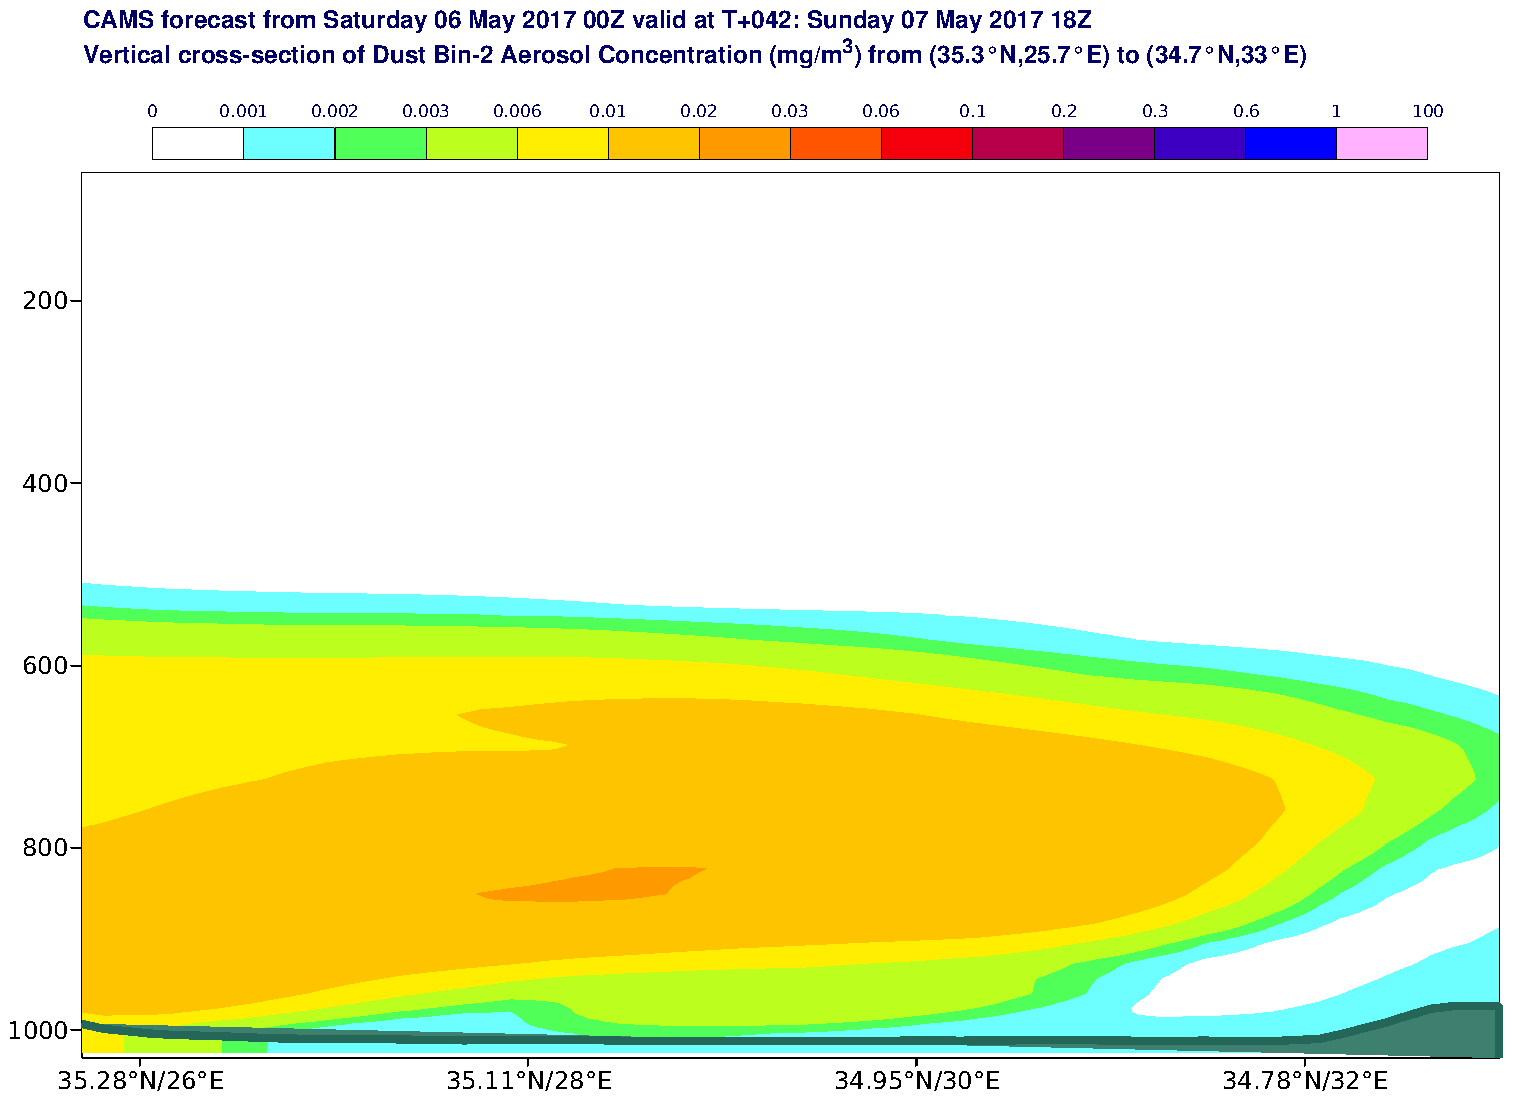 Vertical cross-section of Dust Bin-2 Aerosol Concentration (mg/m3) valid at T42 - 2017-05-07 18:00